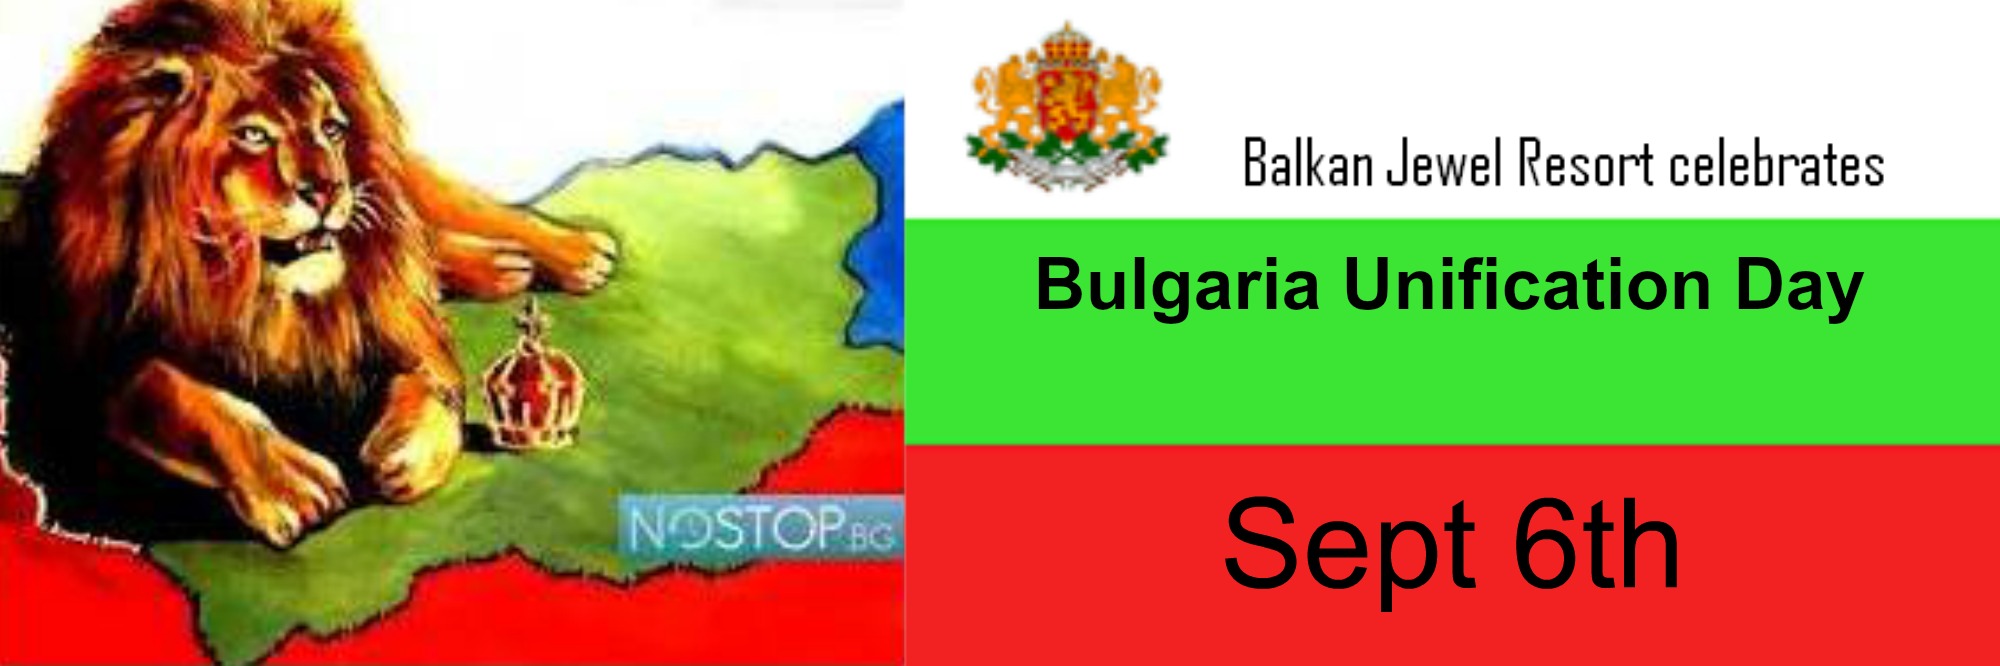 Bulgaria Unification Day September 6th